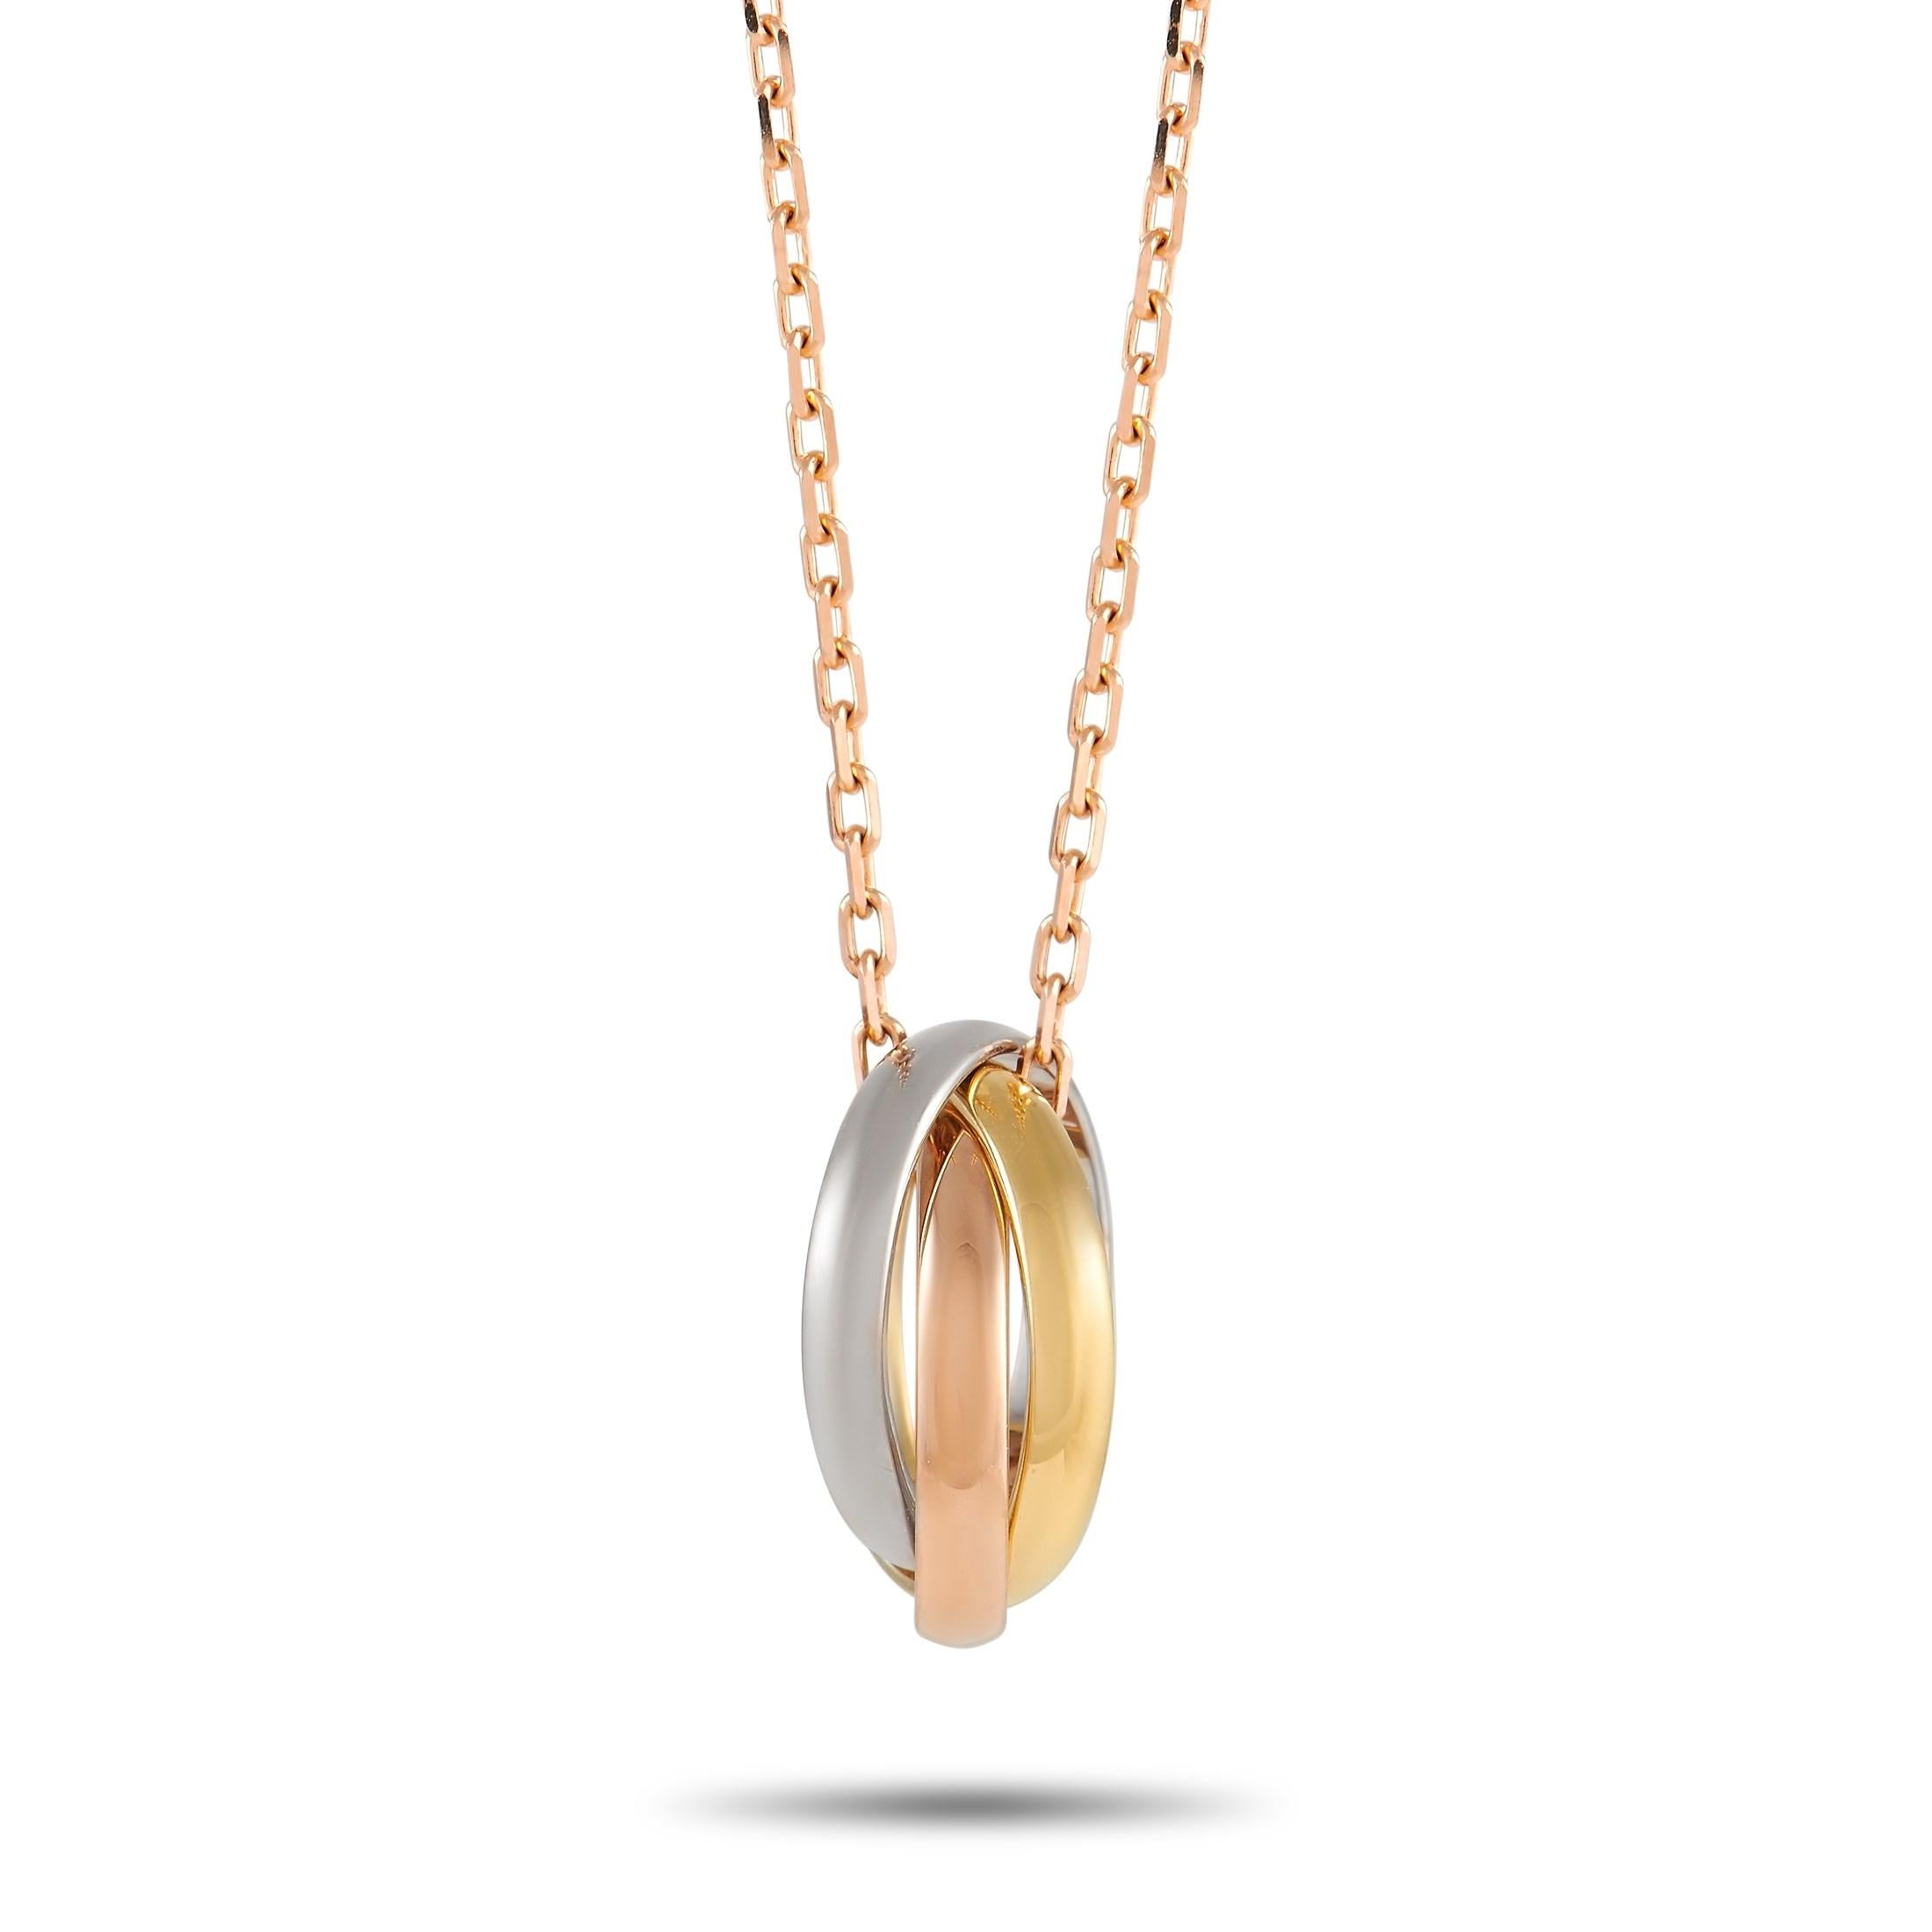 Beautiful and also meaningful, the Cartier 18K Tri-Gold Trinity Ring Necklace makes a timeless statement of love, fidelity, and friendship. It features three interlocking rings fashioned from 18K rose gold, white gold, and yellow gold. The pendant